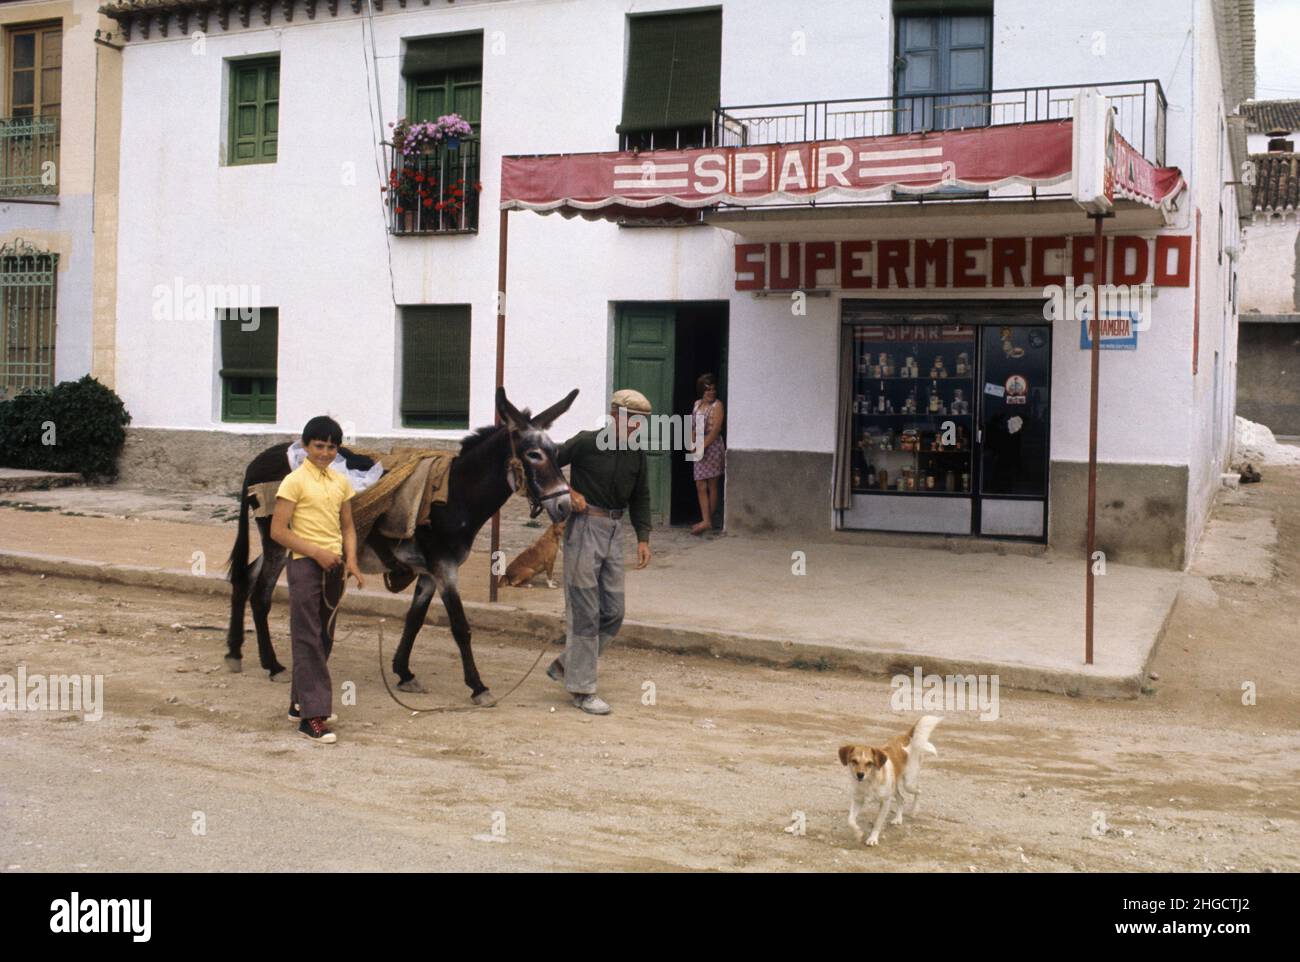 Spain Andalousie supermarket with donkey for shopping Stock Photo